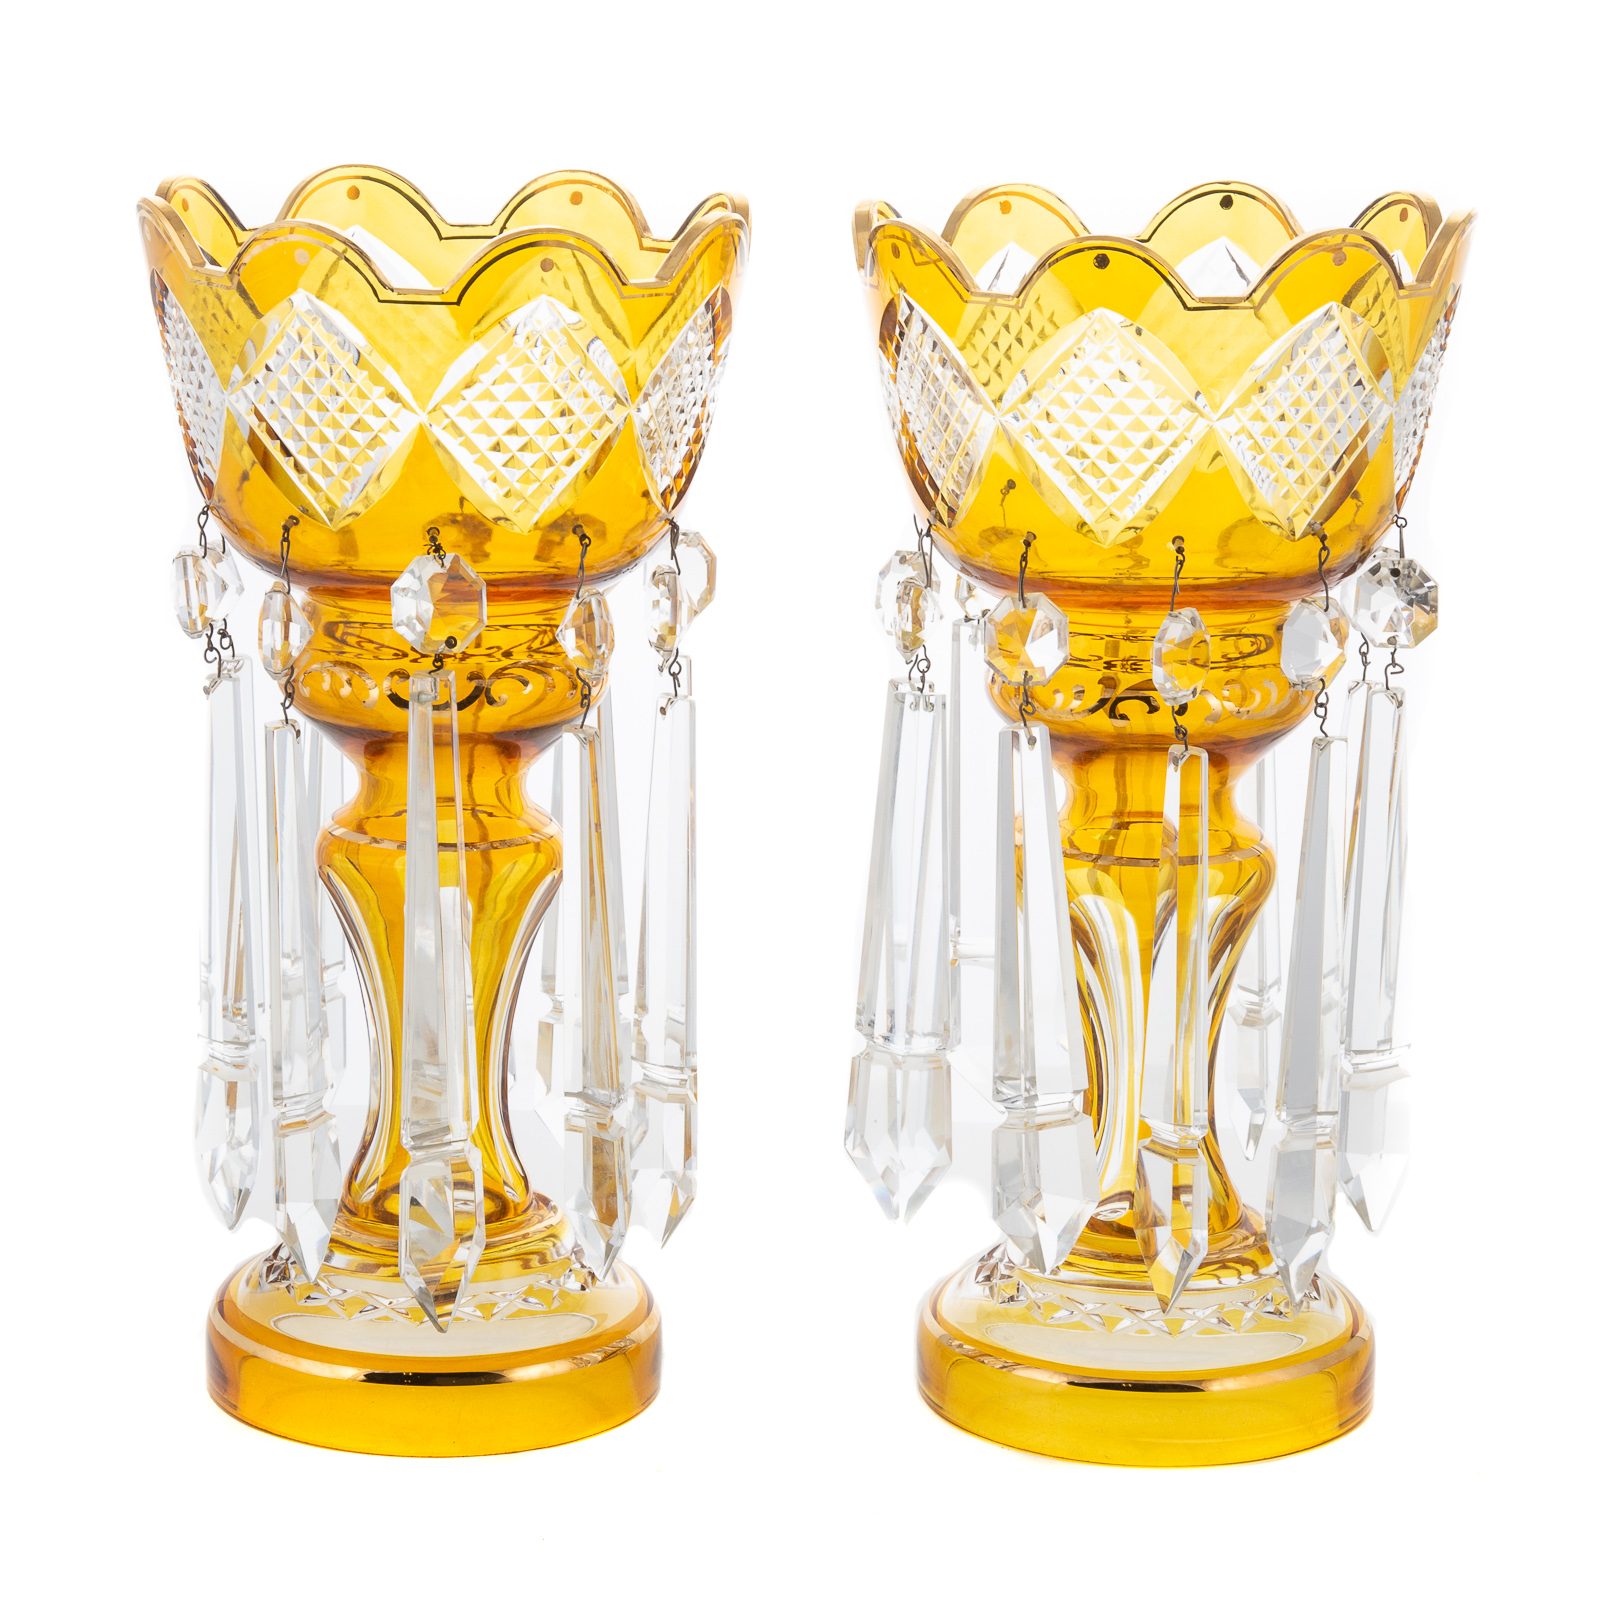 A PAIR OF BOHEMIAN STYLE GLASS